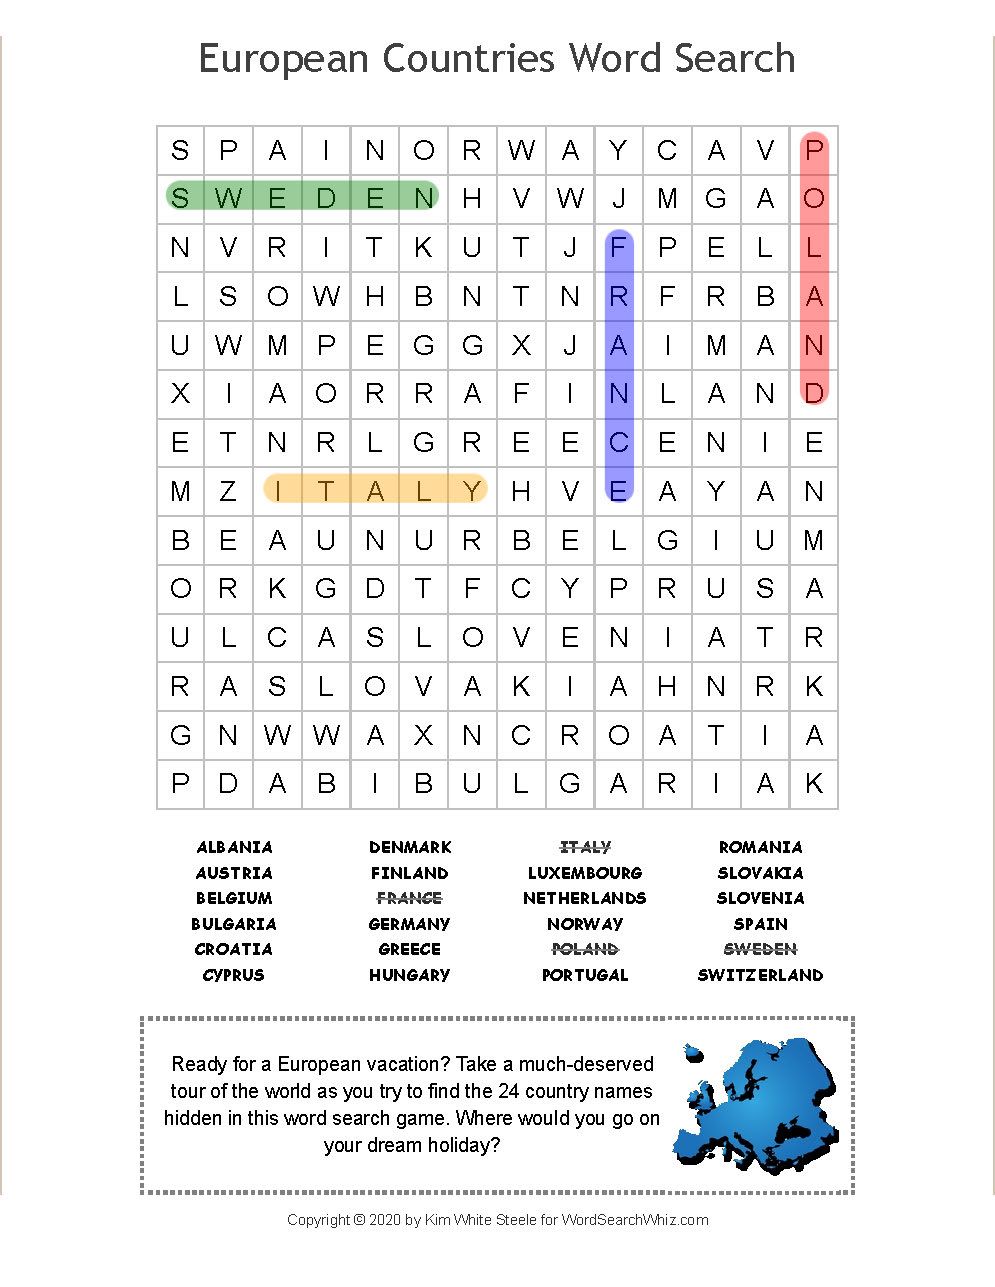 countries-word-search-free-printable-countries-of-europe-word-search